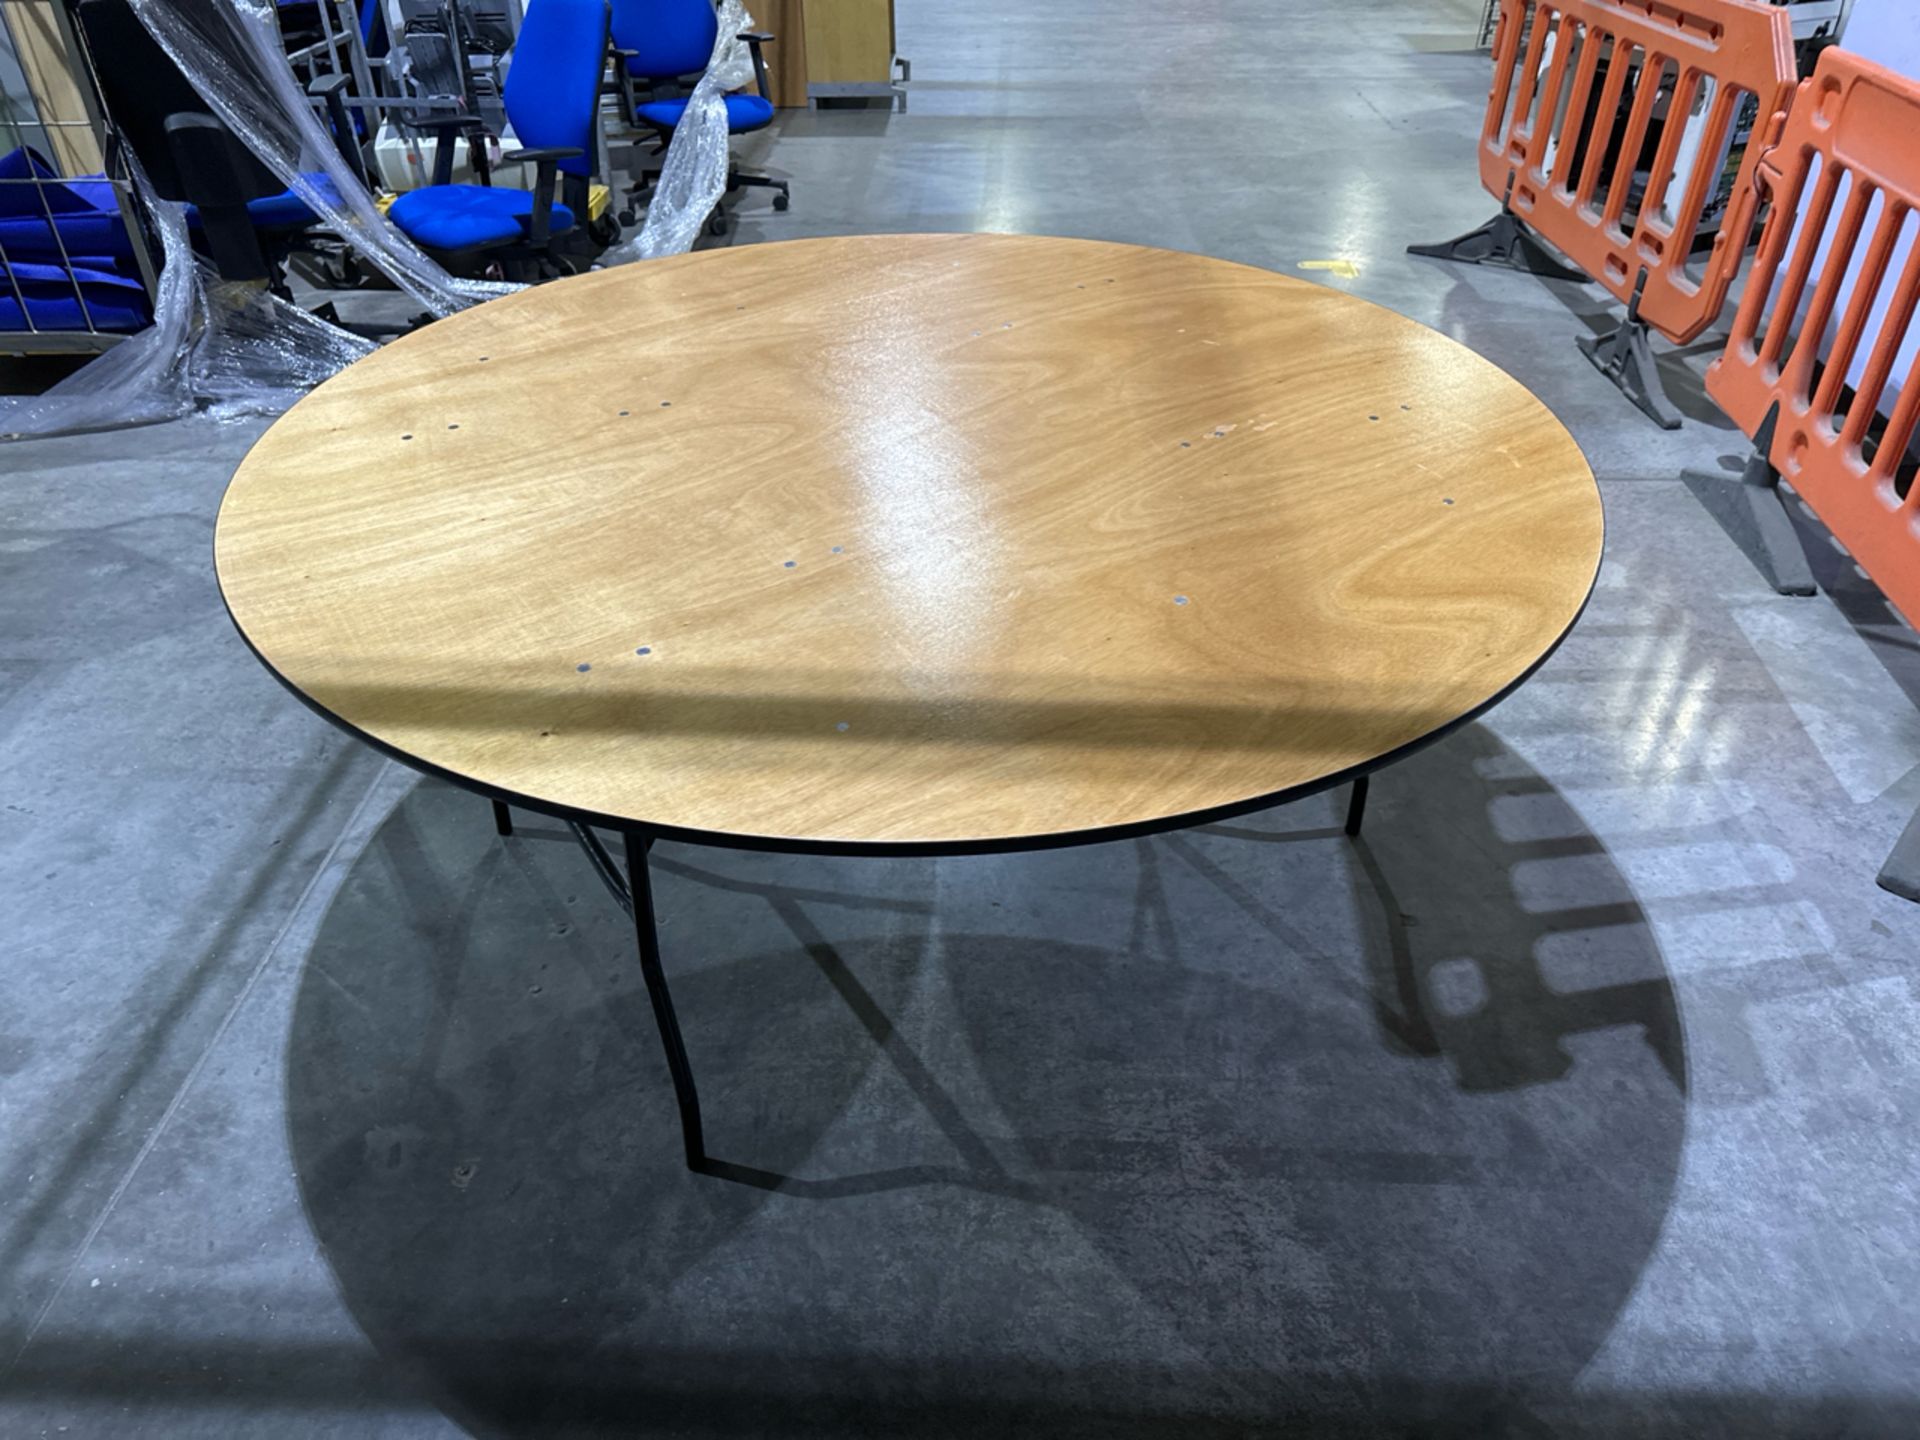 6ft Round Conference Table - Image 2 of 2